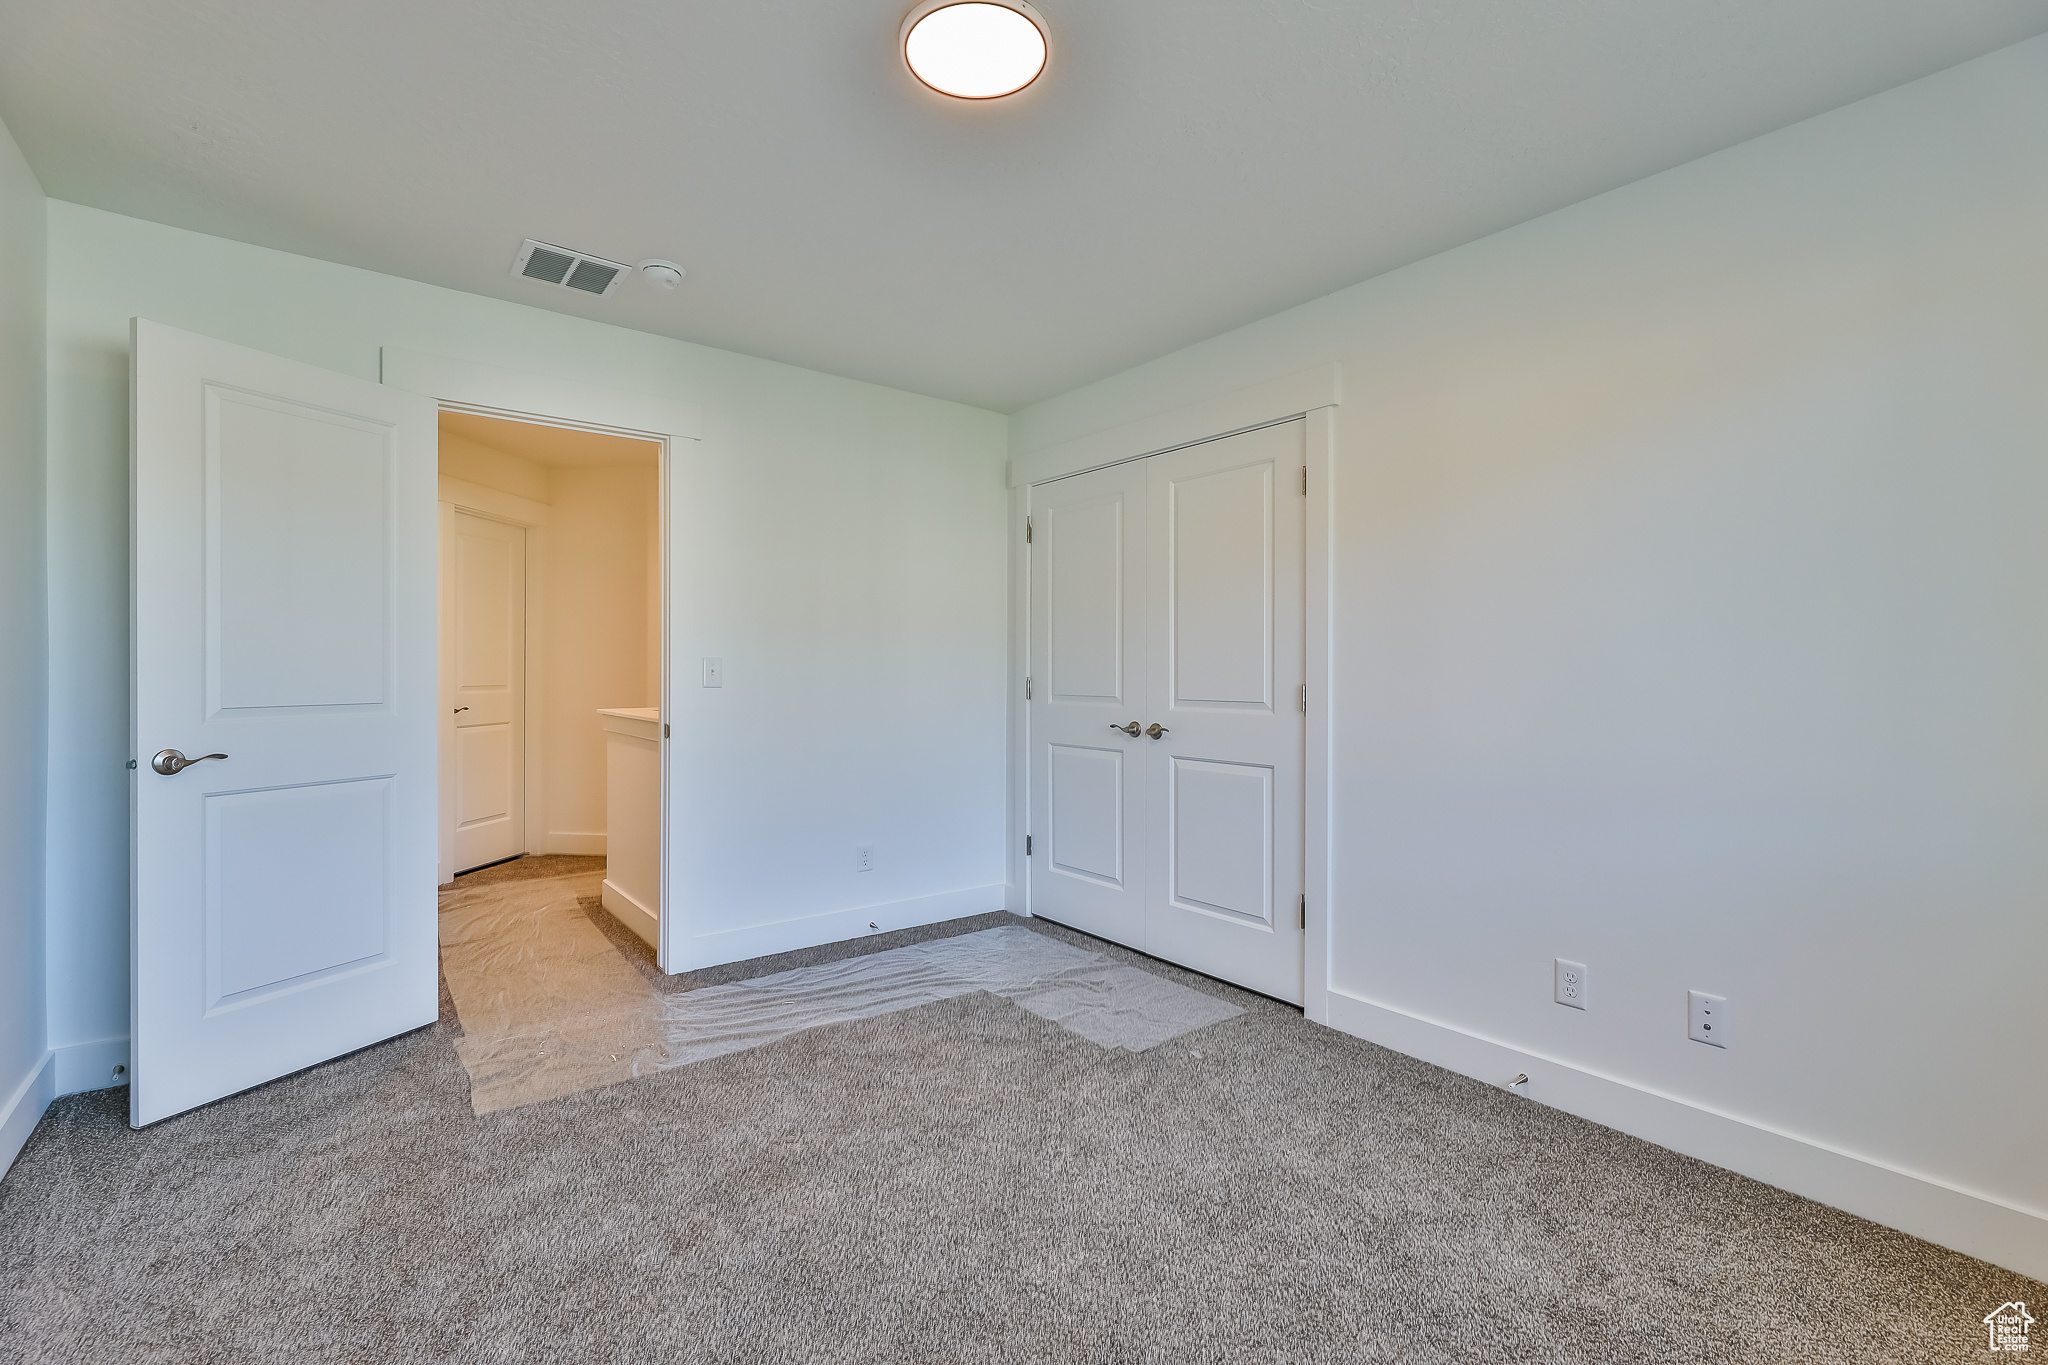 Unfurnished bedroom with light colored carpet and a closet